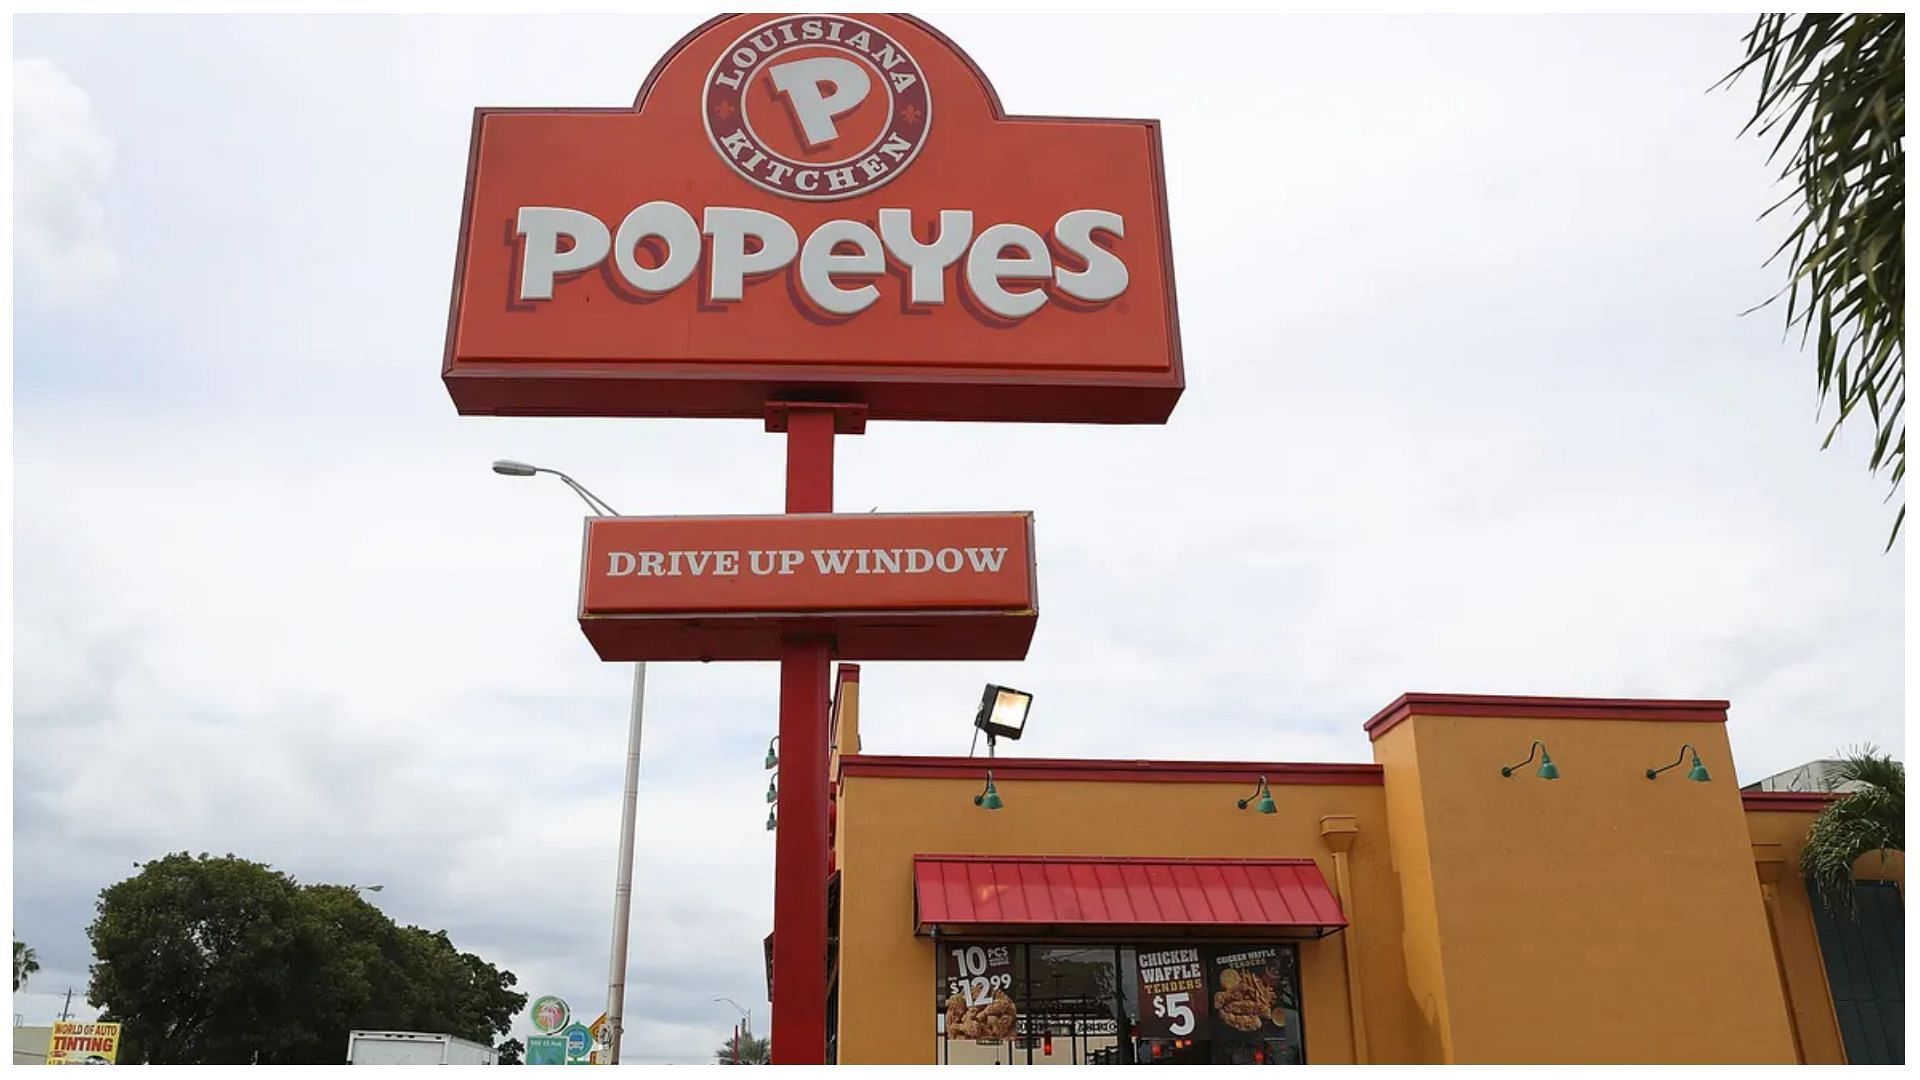 A Popeyes restaurant in Miami, Florida (Photo by Joe Raedle/Getty Images)